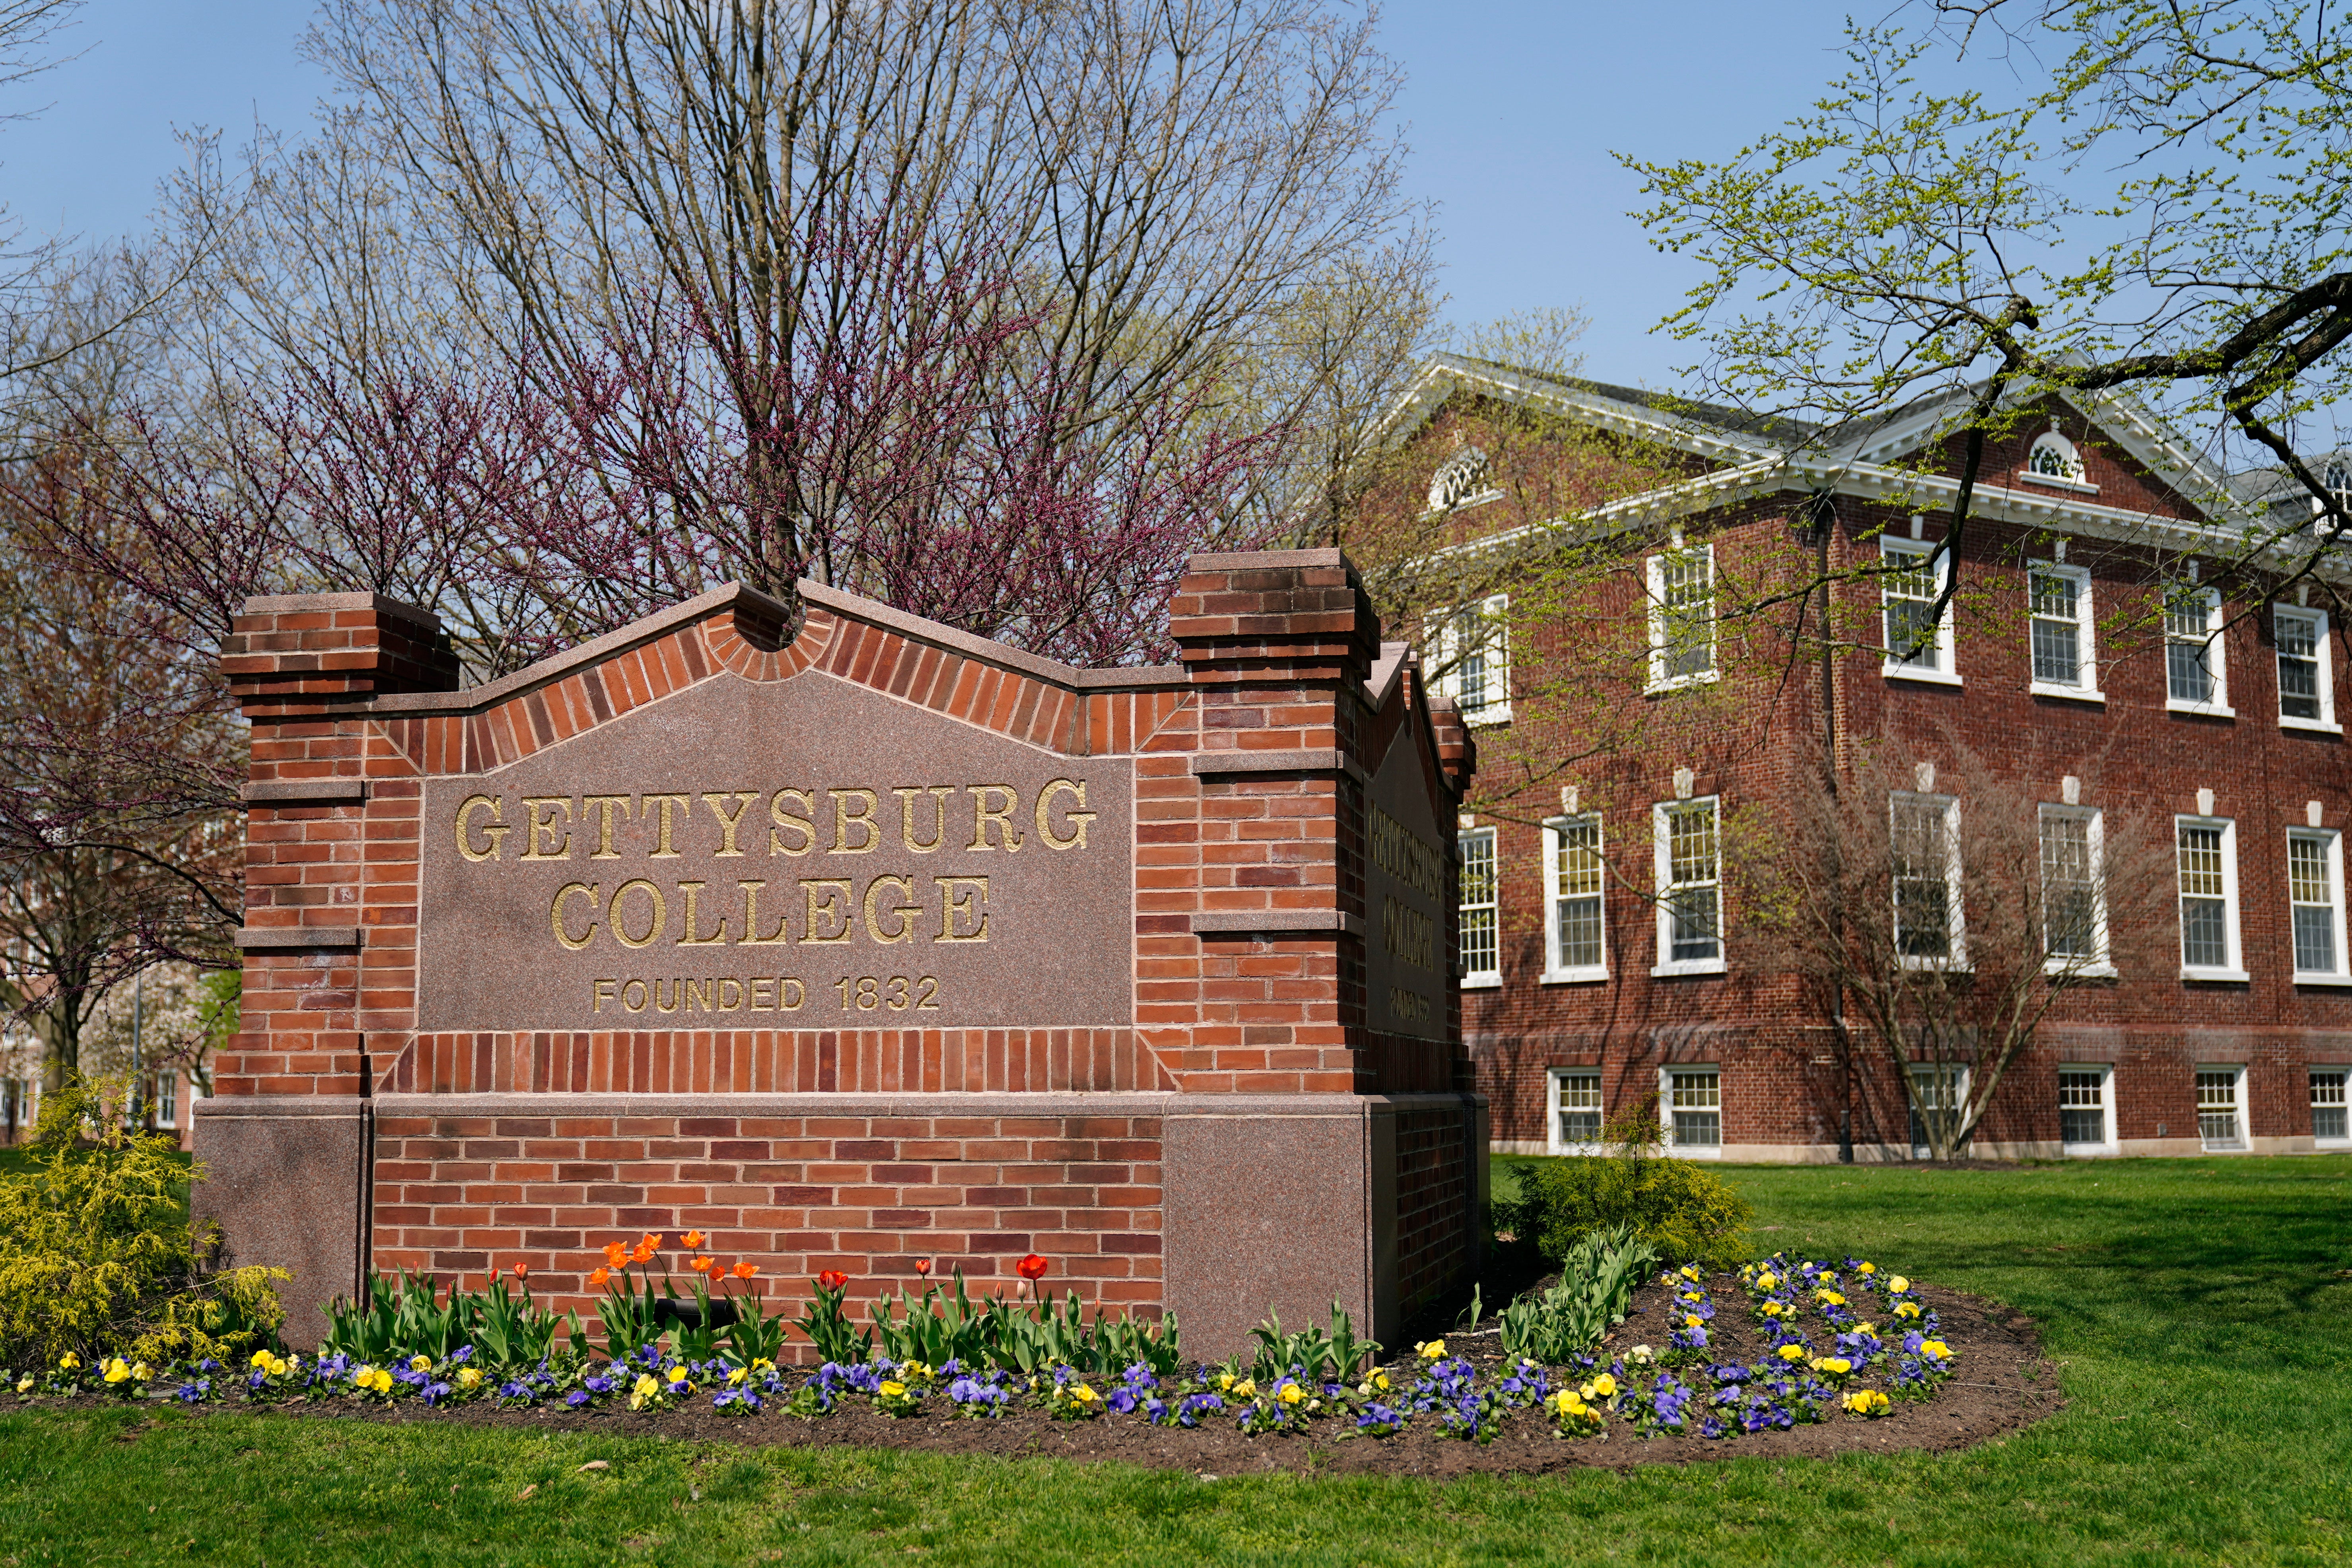 A sign for Gettysburg College stands on April 7, 2021, in Gettysburg